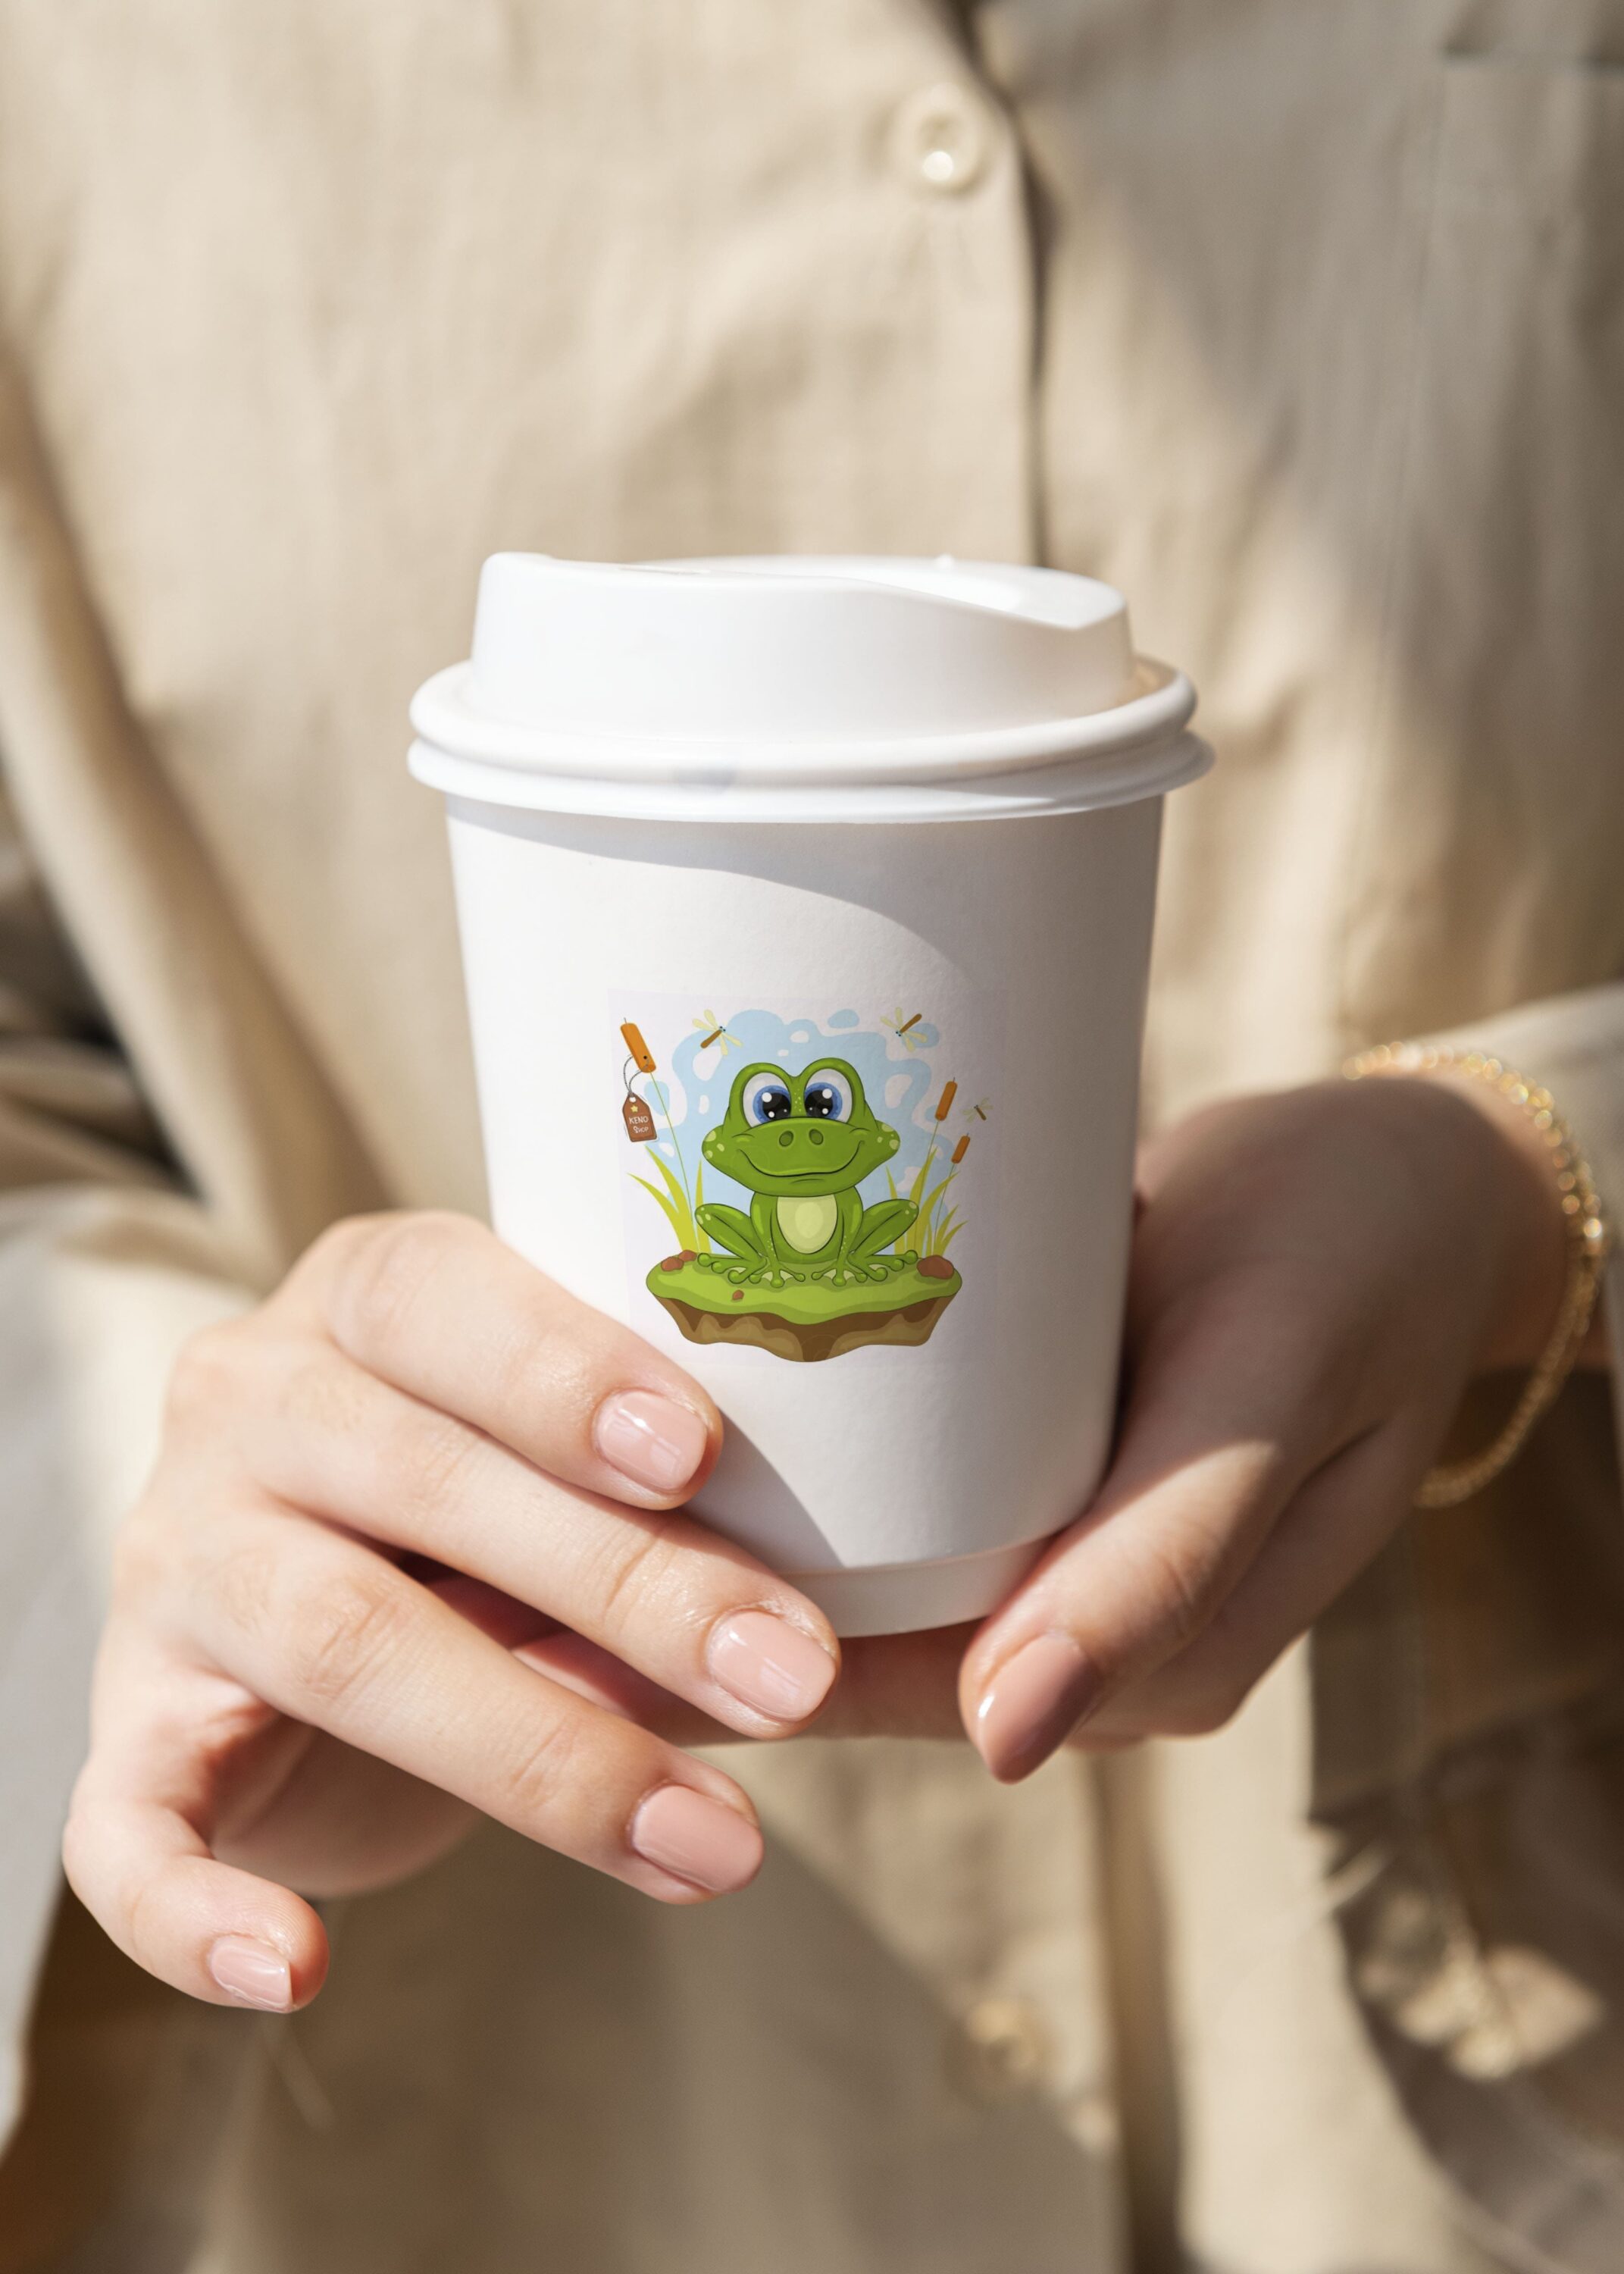 Cup illustrated with cartoon green frog.